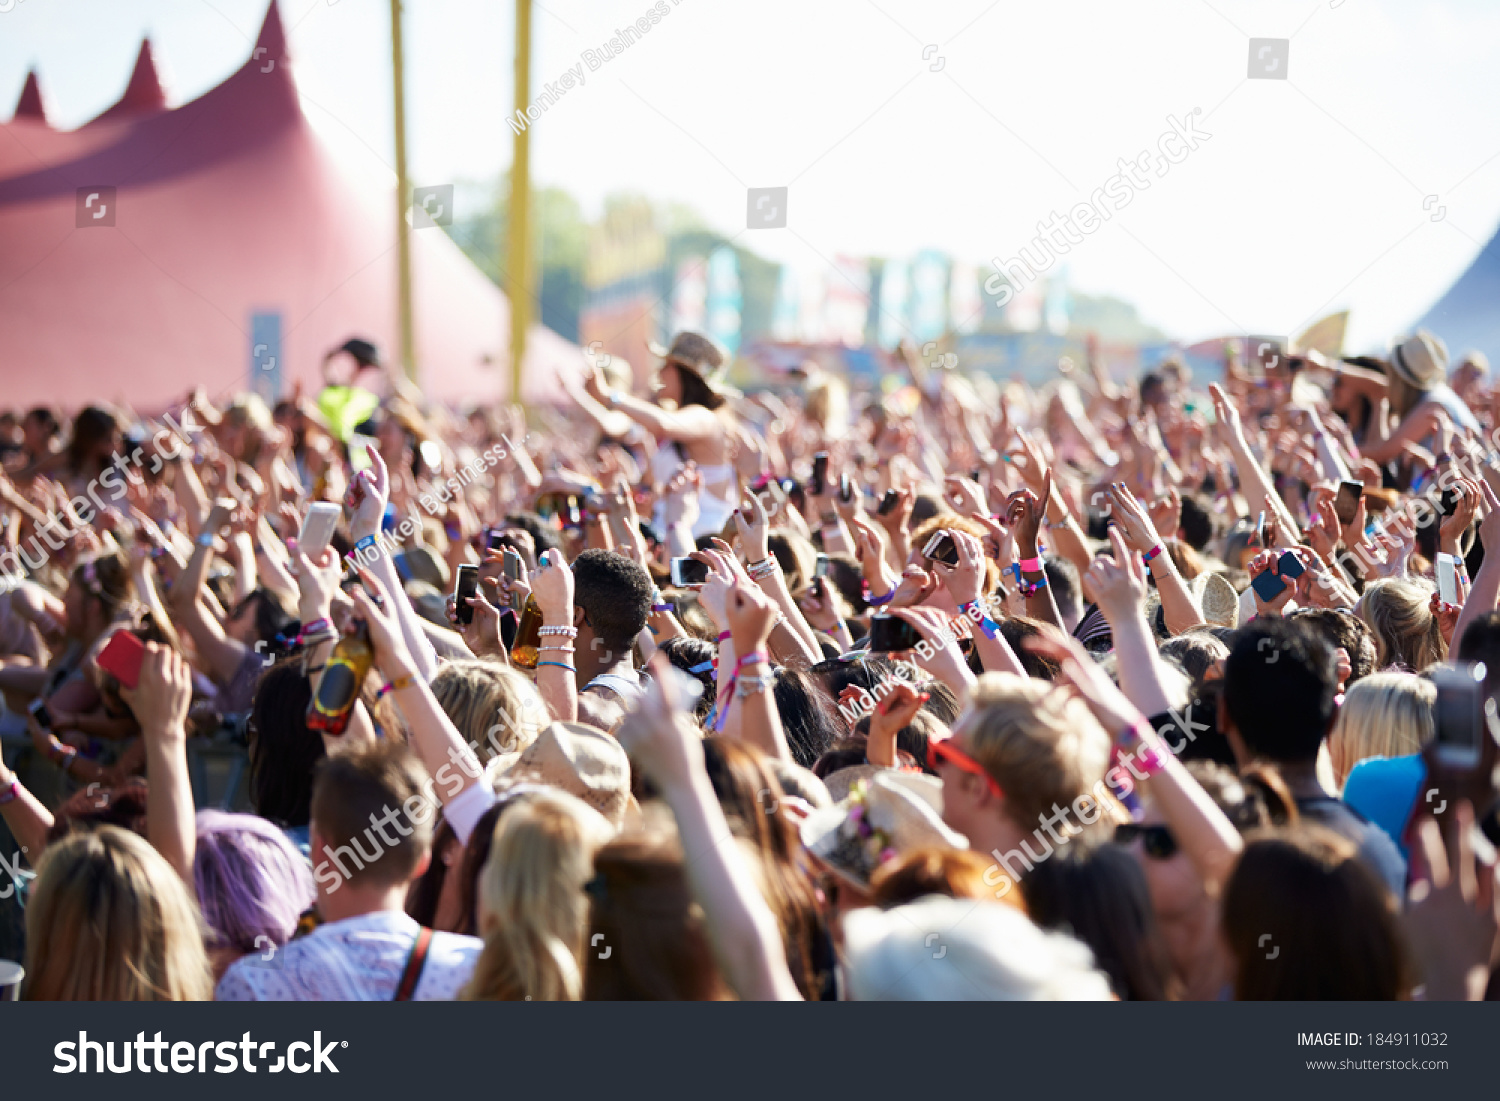 Crowds Enjoying Themselves At Outdoor Music Festival #184911032